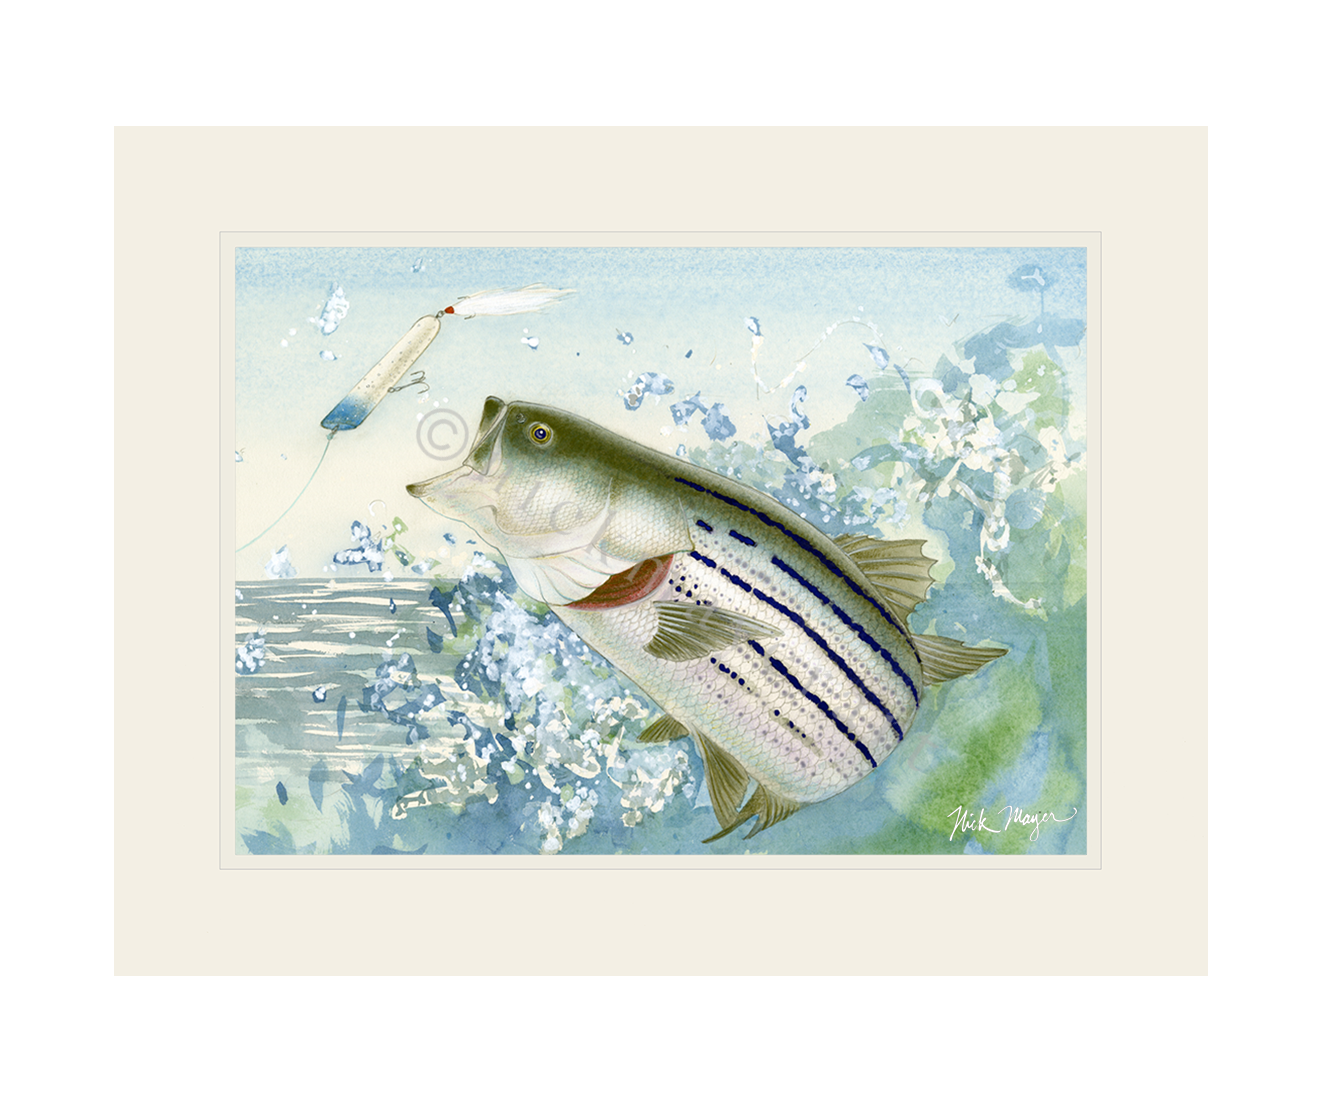 [New] Striper Fishing Shirts for Men with Striped Bass Fish Artwork X-Large / White